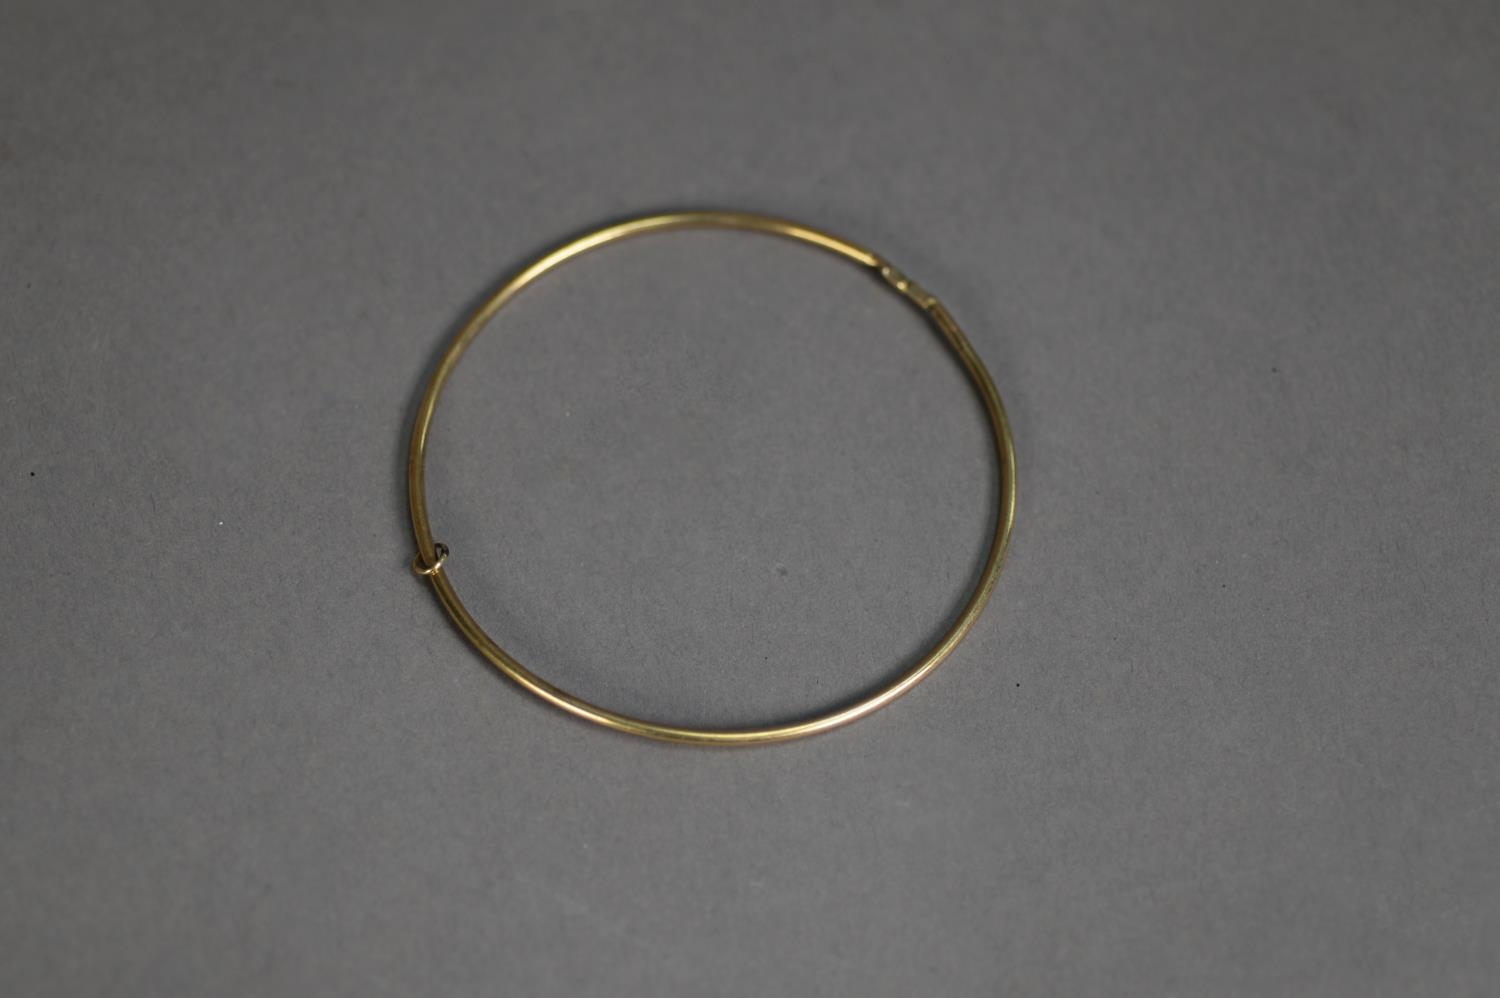 GOLD COLOURED METAL (unmarked) HOLLOW WIRE PATTERN BANGLE, 2.9gms - Image 2 of 2